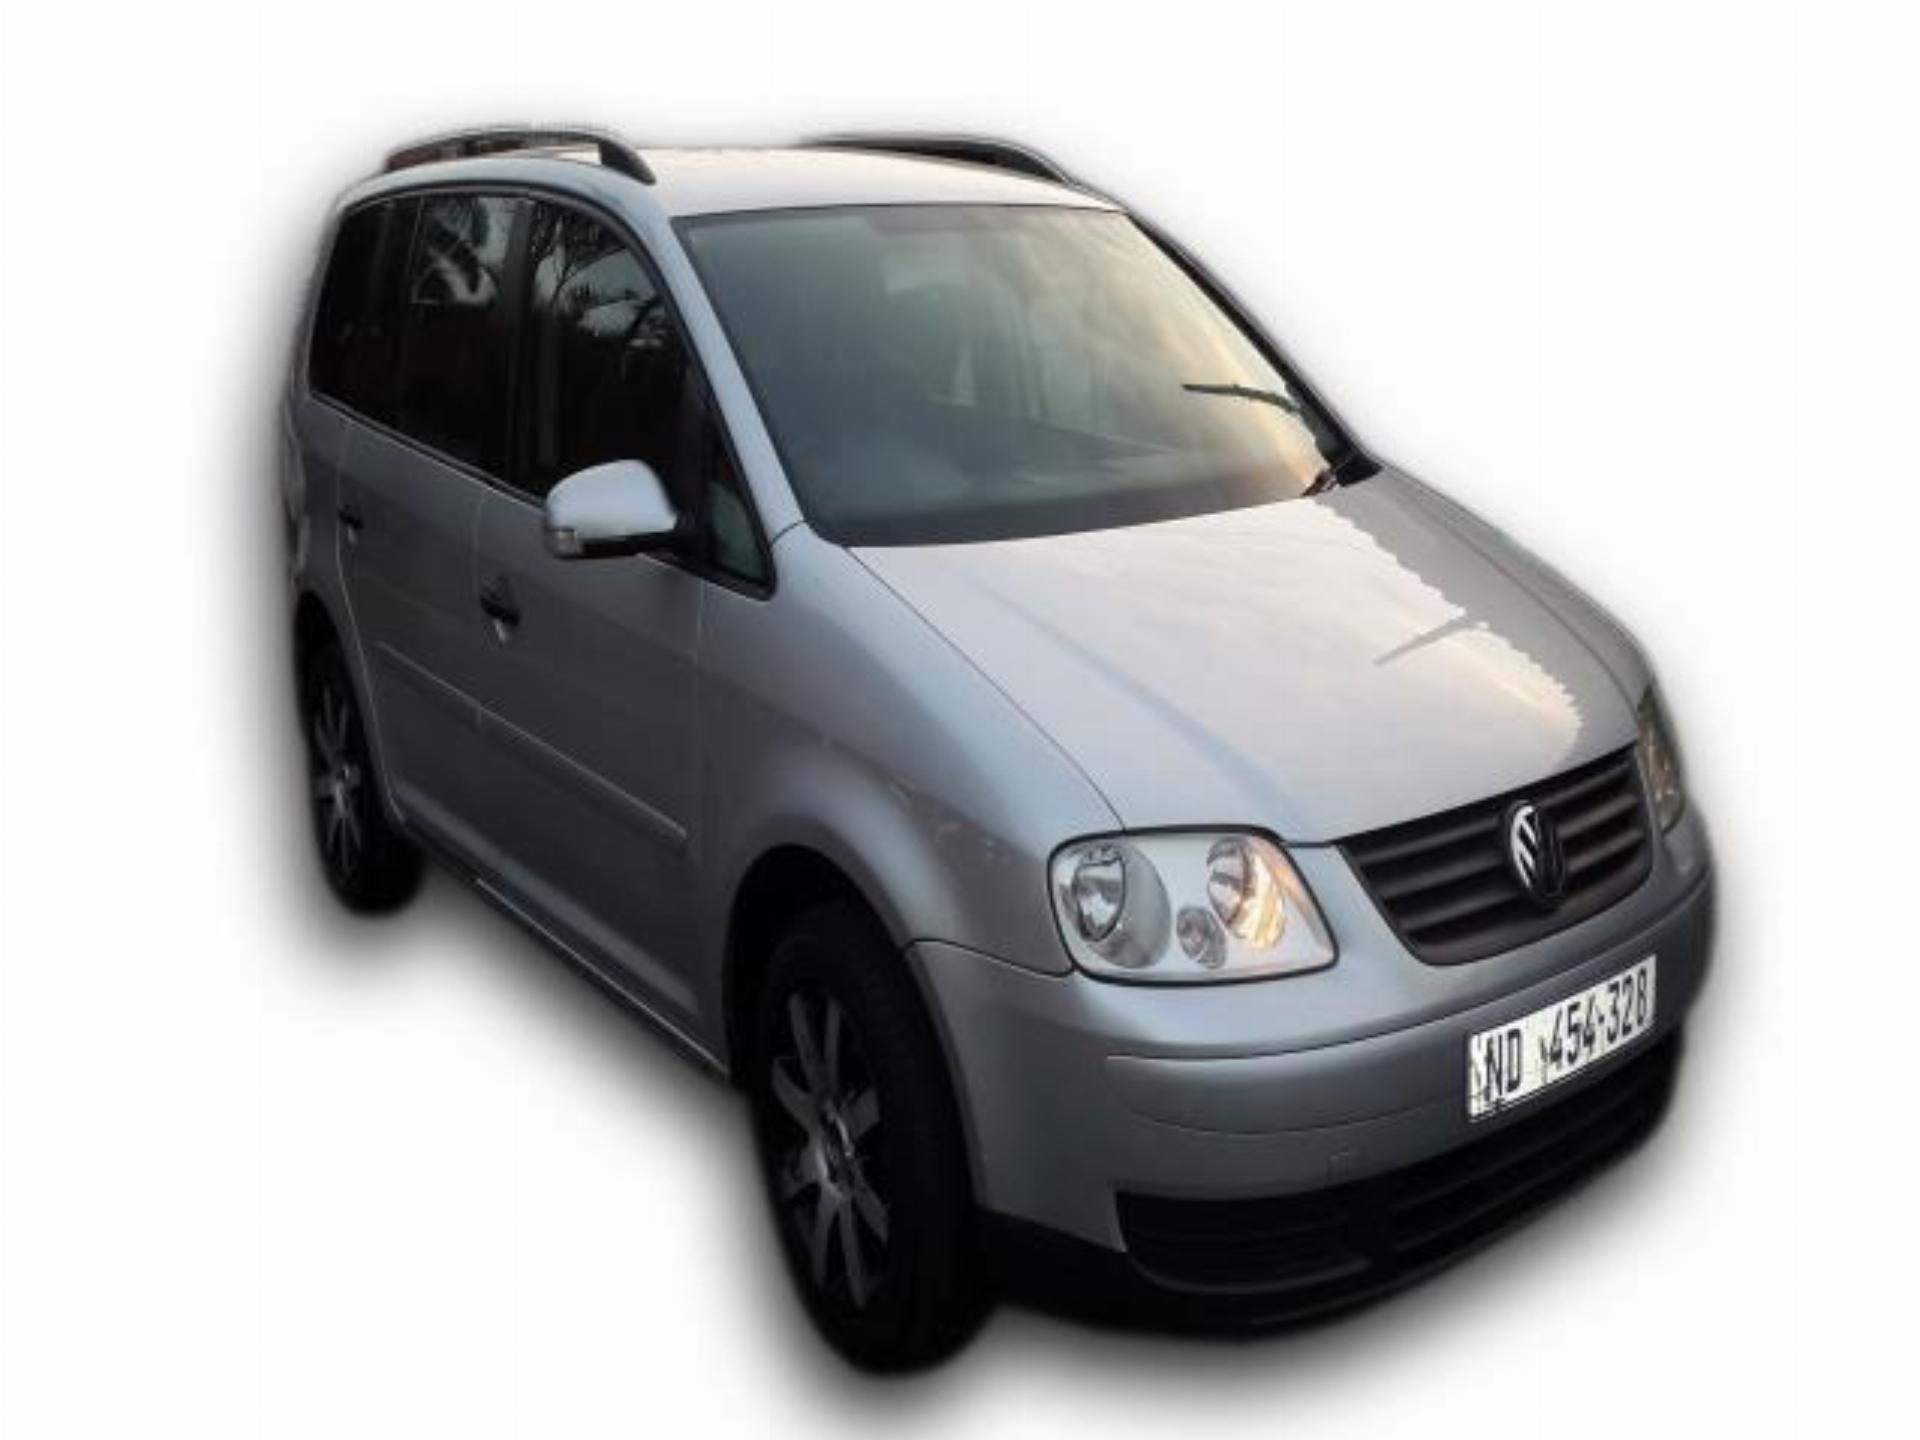 Used Volkswagen Touran Tdi 1.9 2006 on auction PV1007781